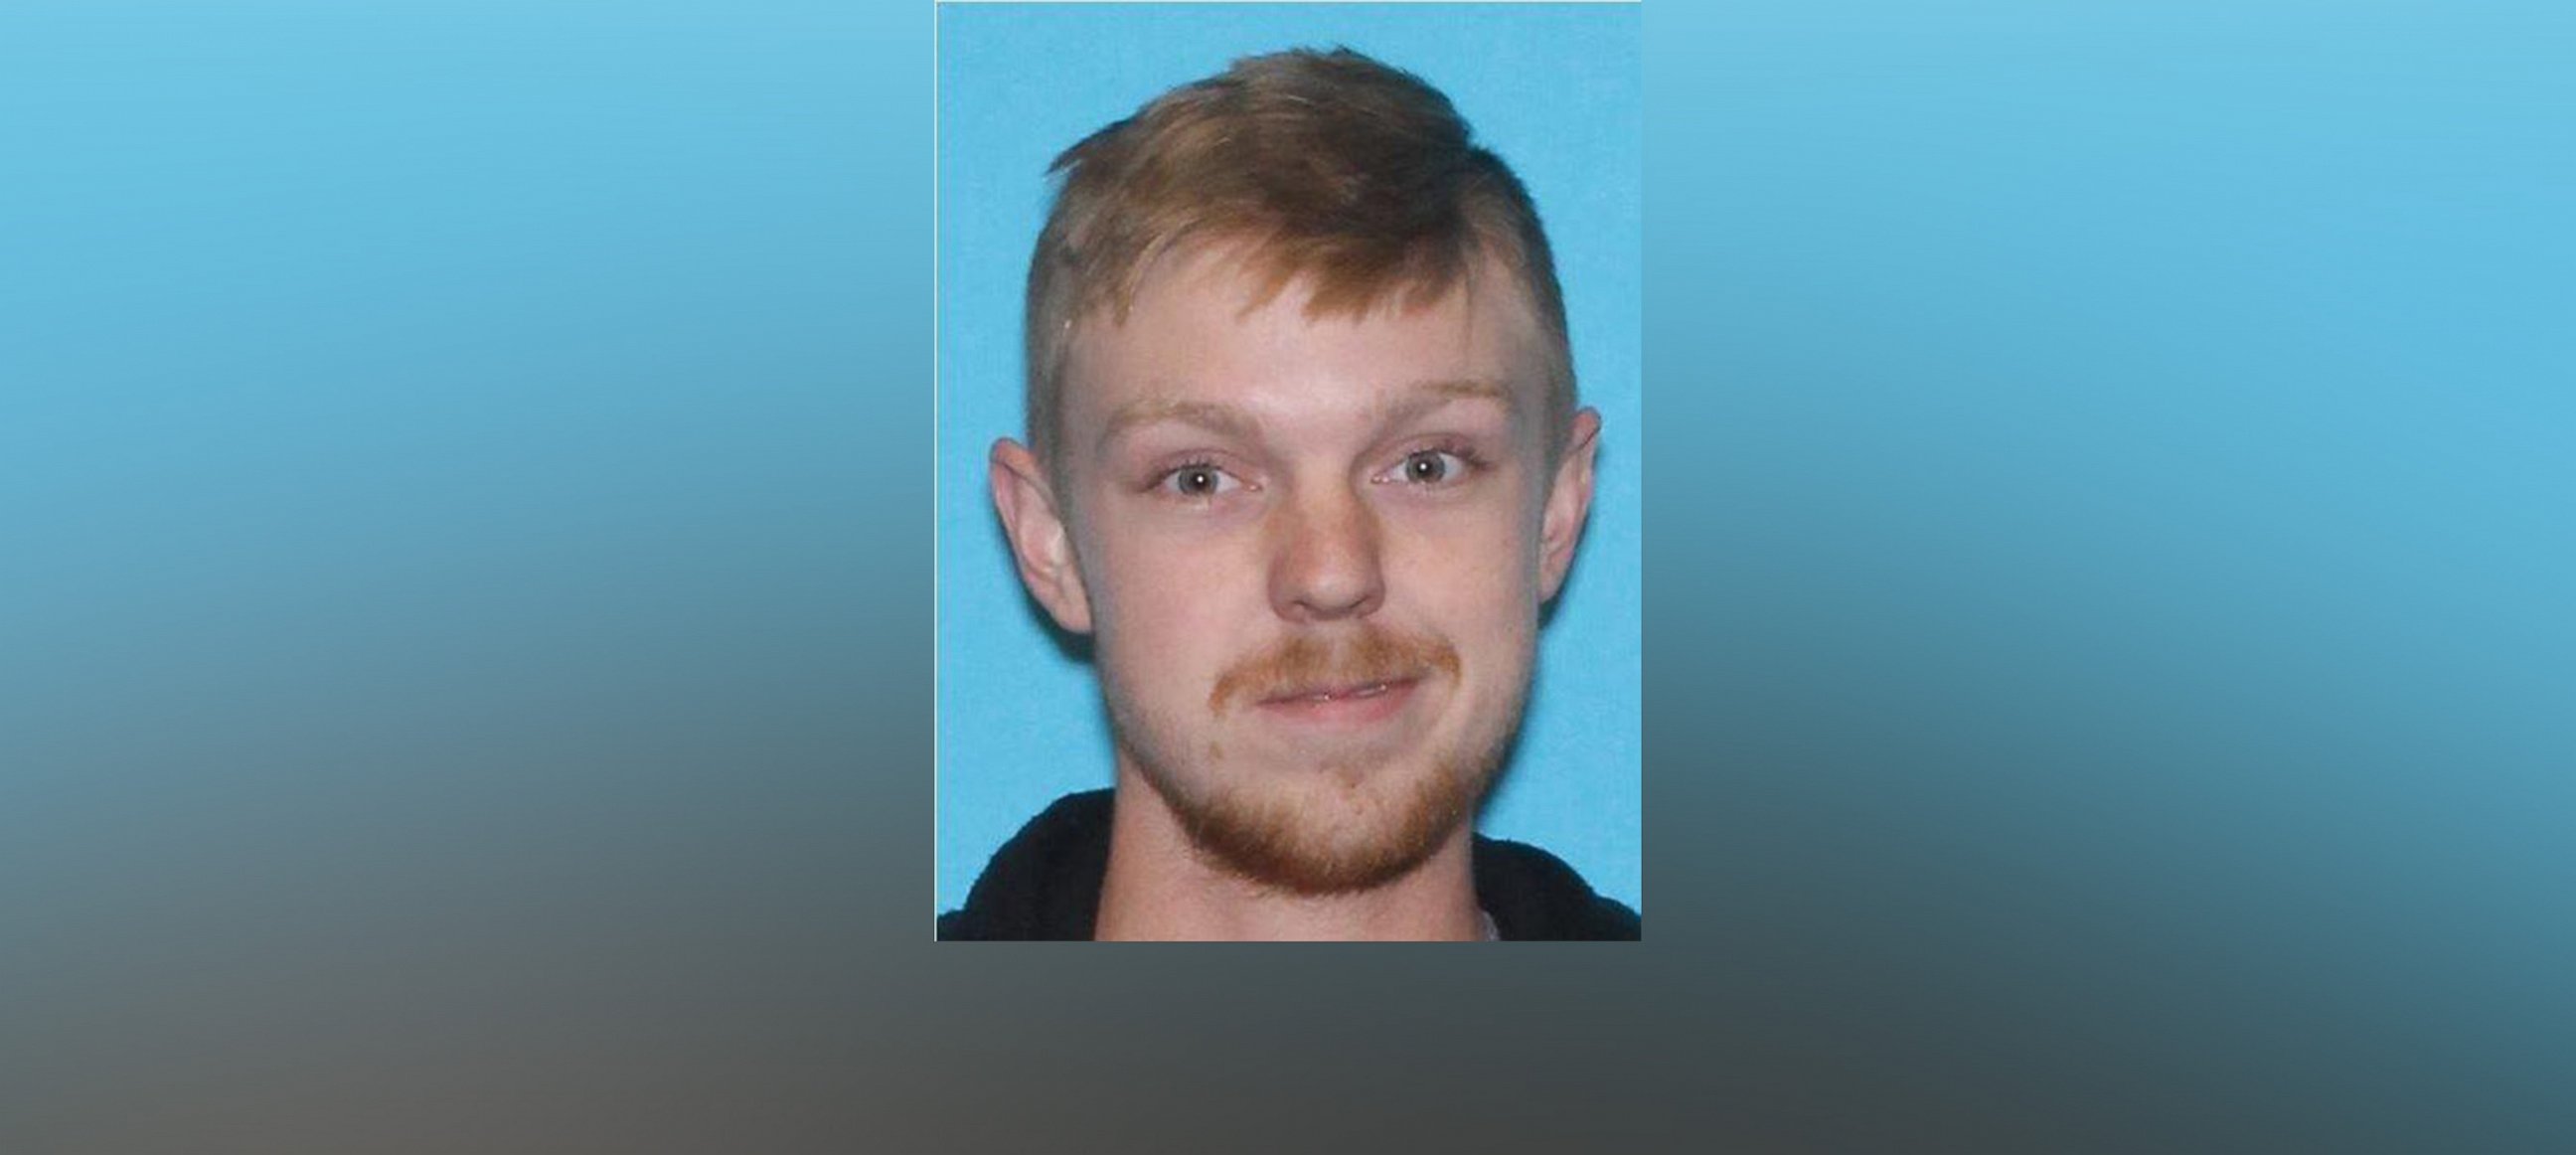 PHOTO: Ethan Anthony Couch is pictured in an undated photo released by the U.S. Marshals Service on Dec. 18, 2015.